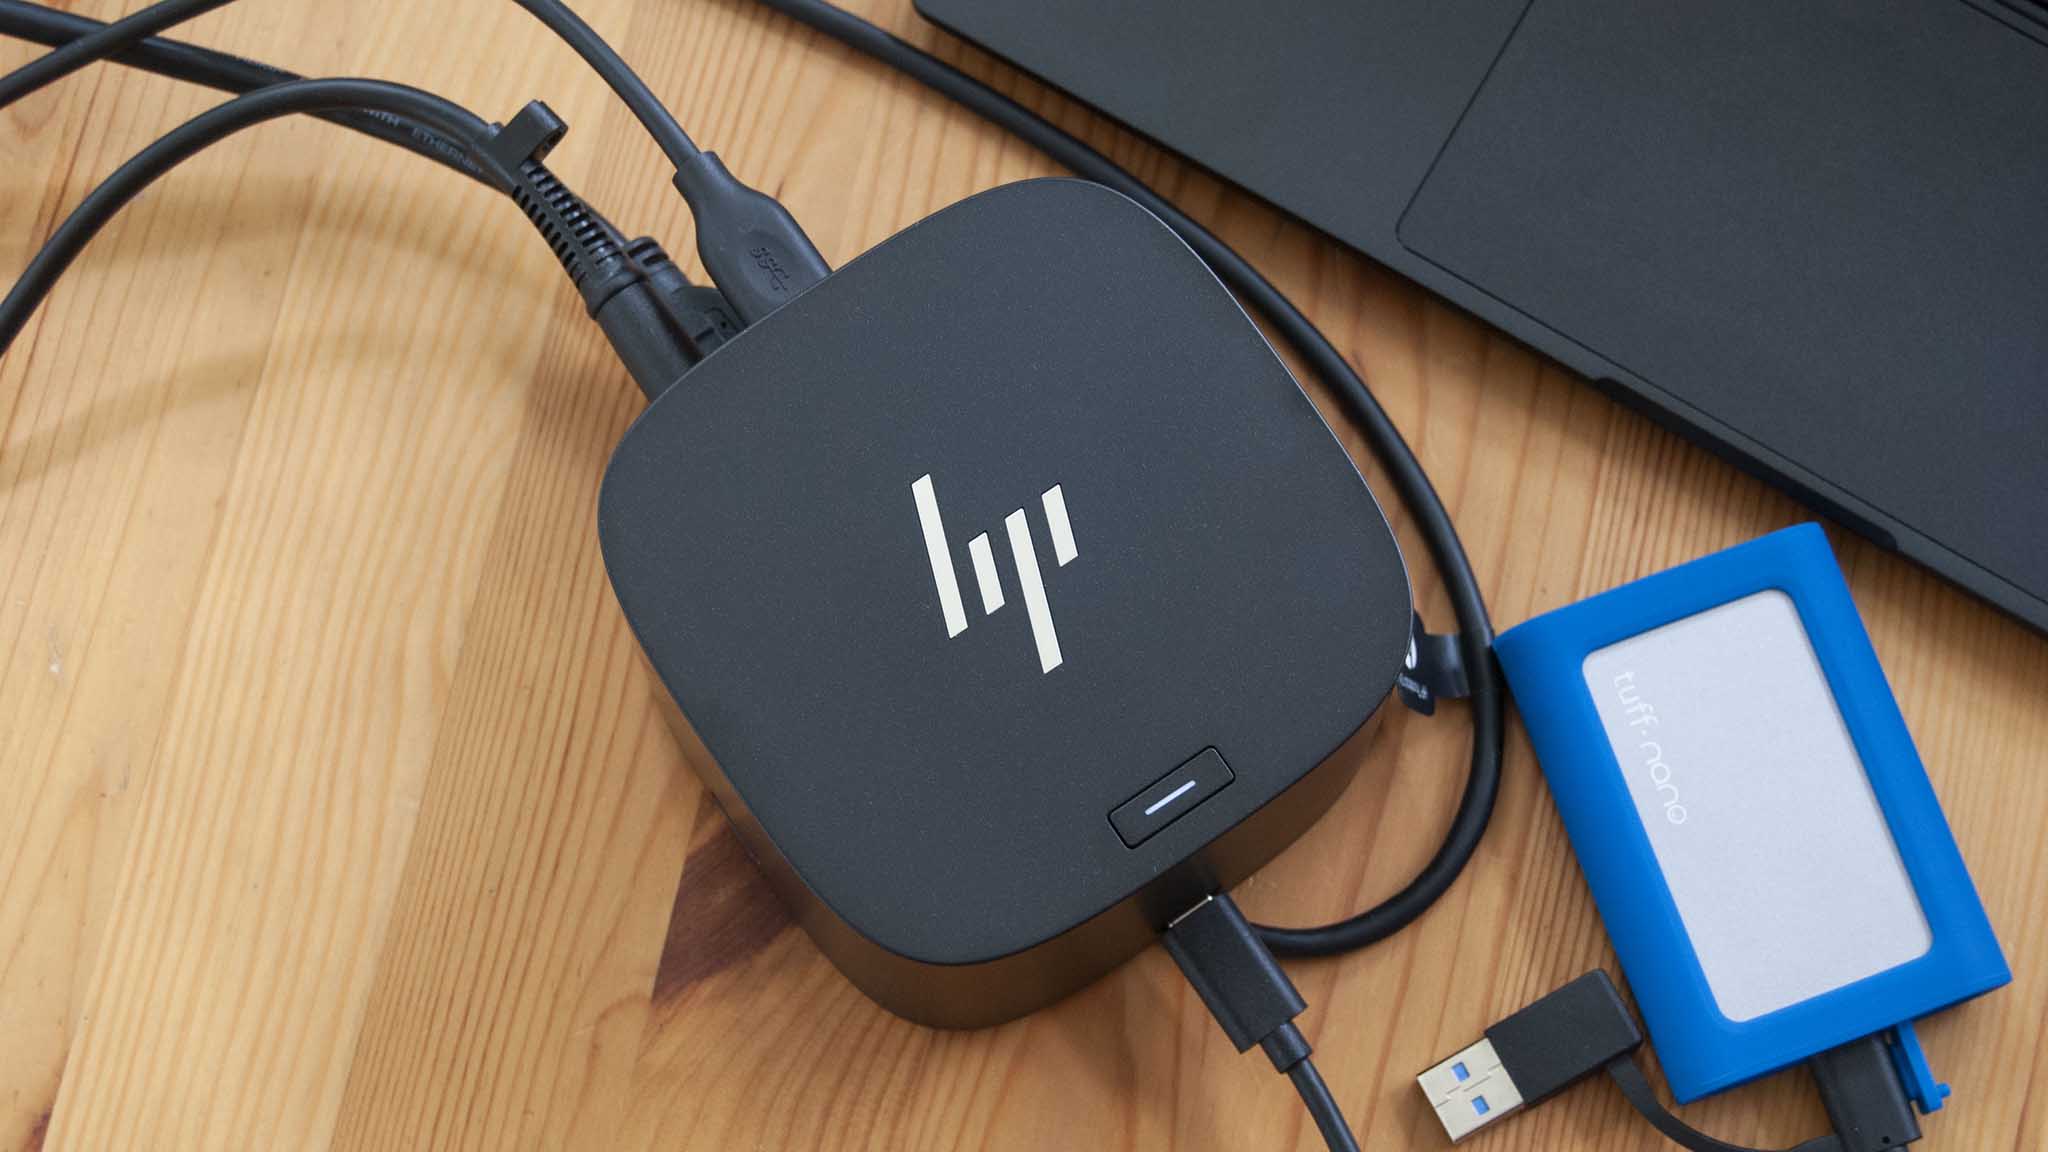 HP Thunderbolt G4 Dock HP's new dock focuses on security, management, charging, and display | Central